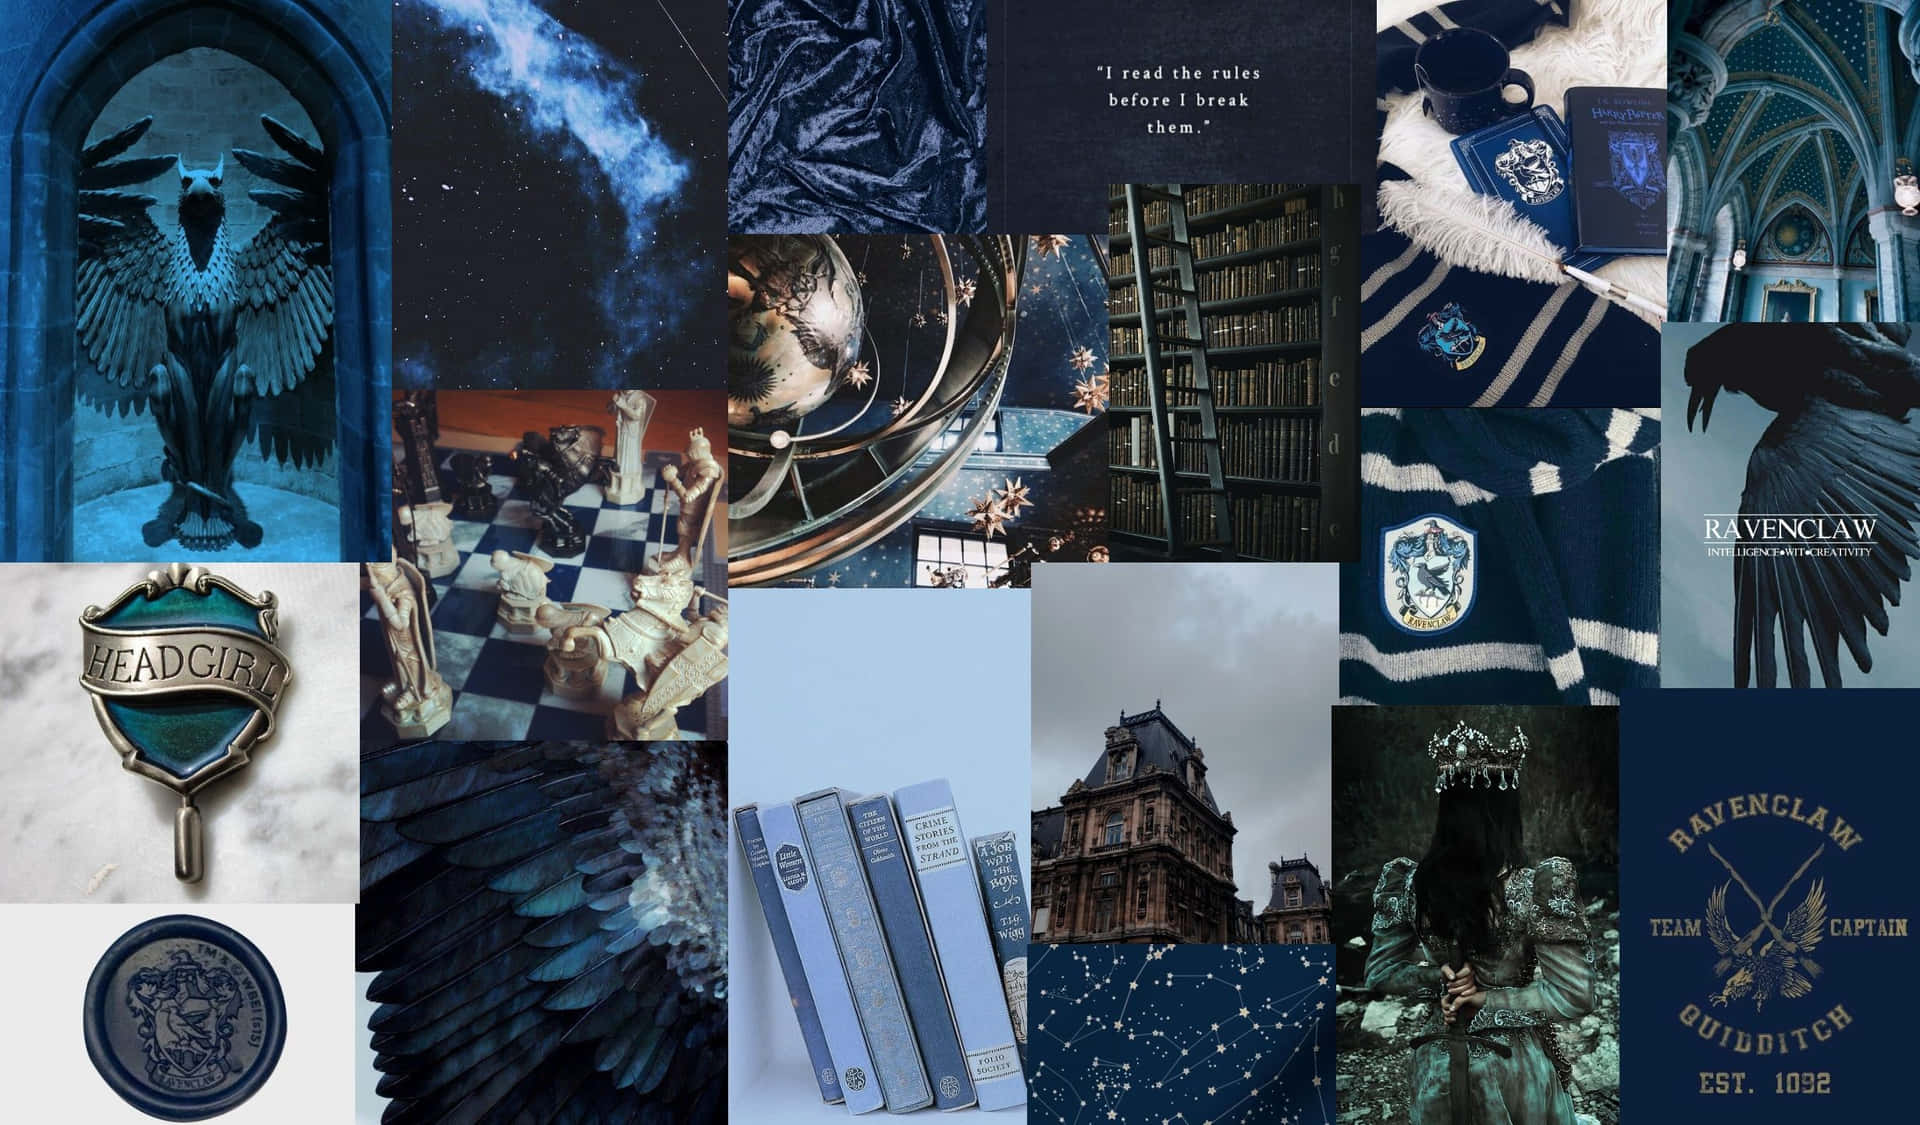 "Making a Home at Hogwarts - Come join the Ravenclaw house!"